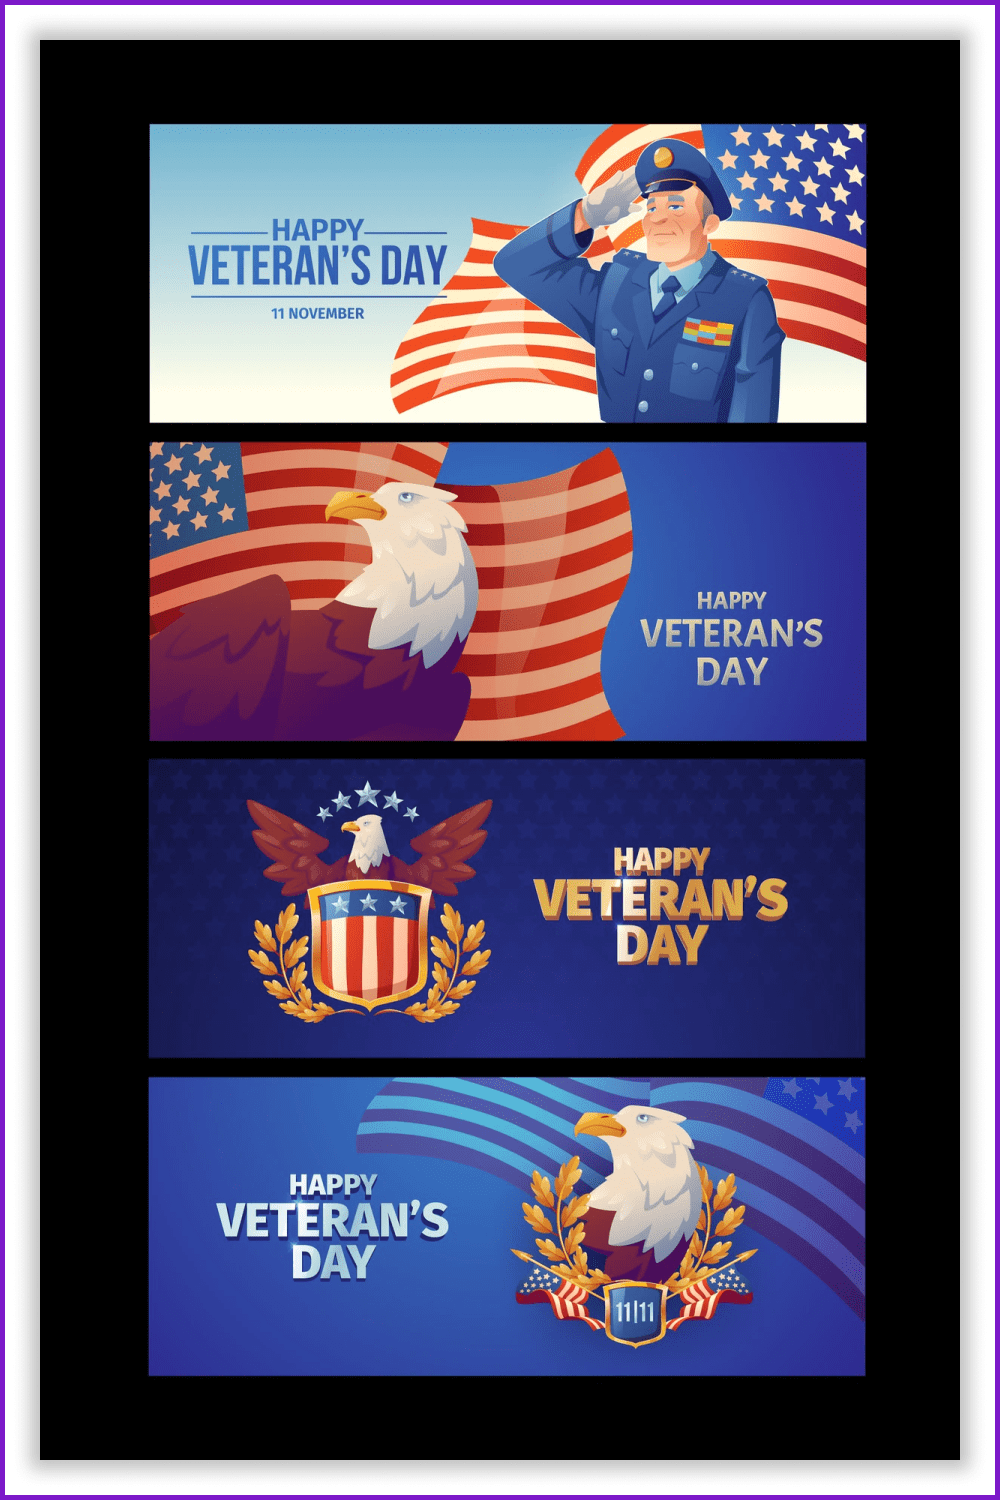 Collage of horizontal banners for Veterans Day.